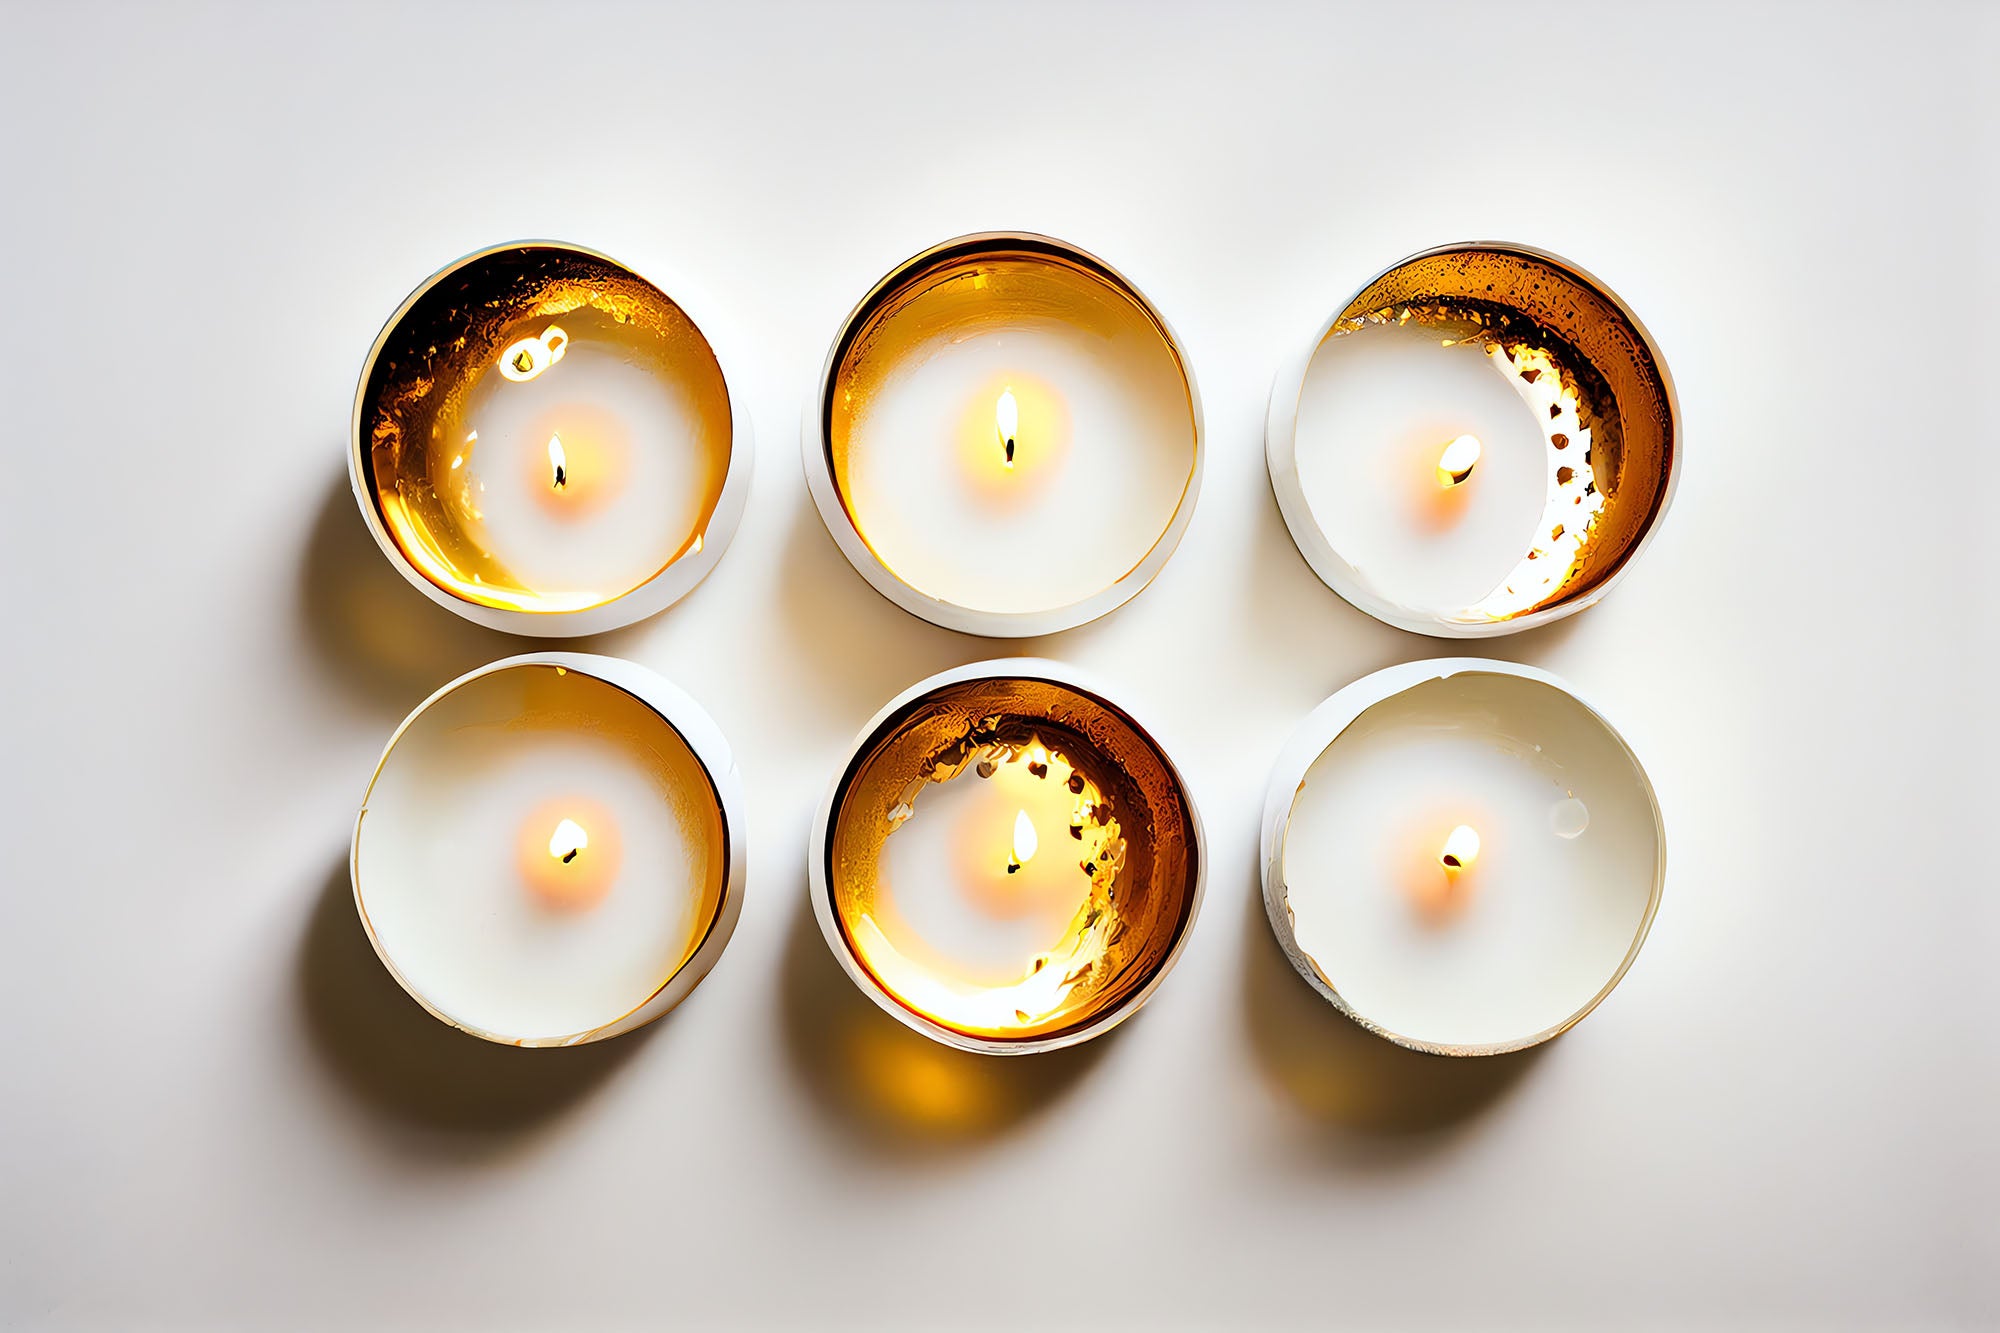 Four Truffles Prevent Candle Sooting